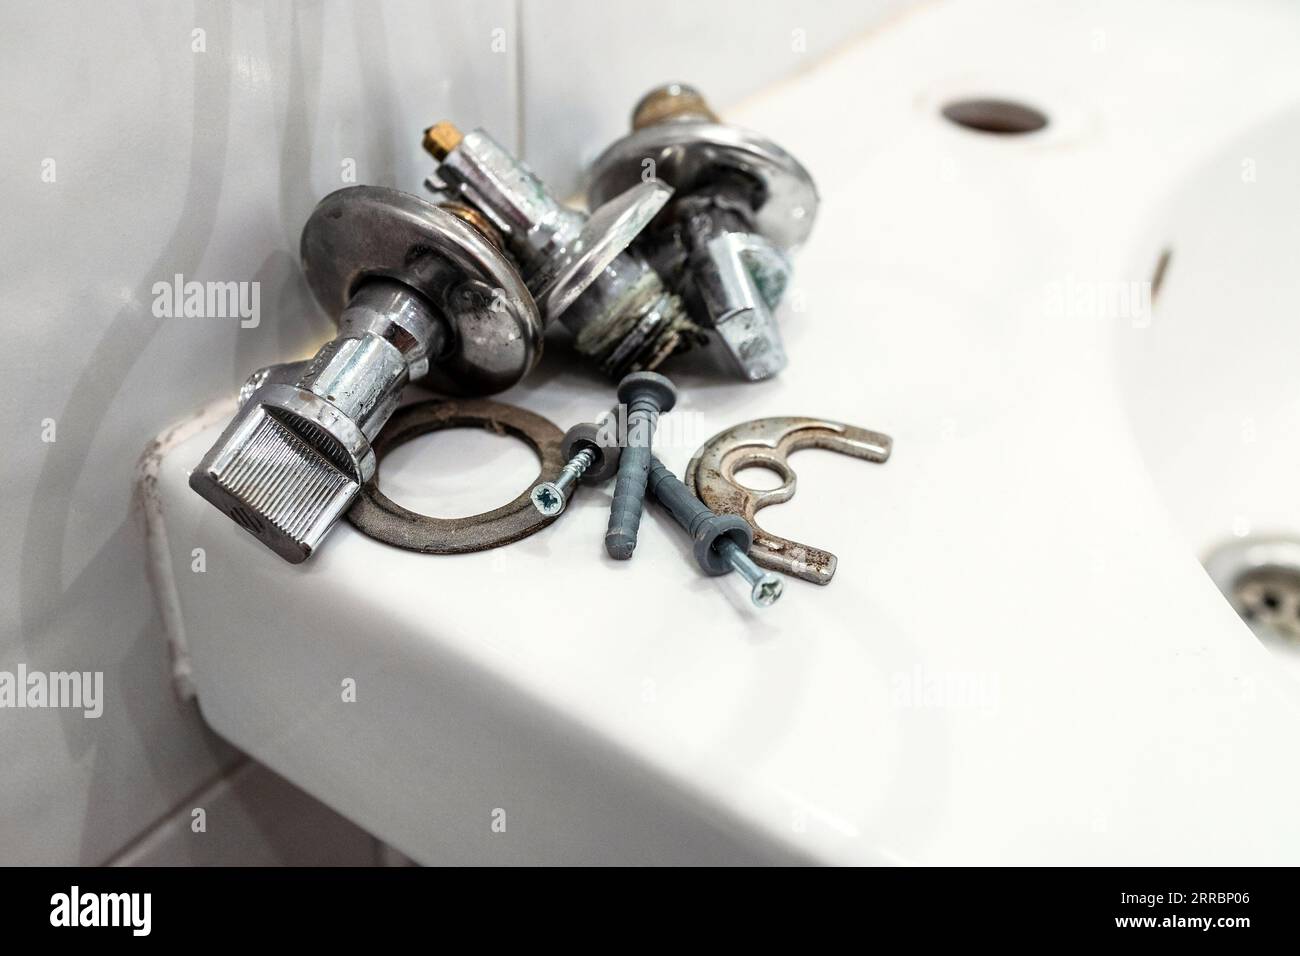 faulty ball valves and fixtures lie on edge of sink close up after removing the faucet Stock Photo